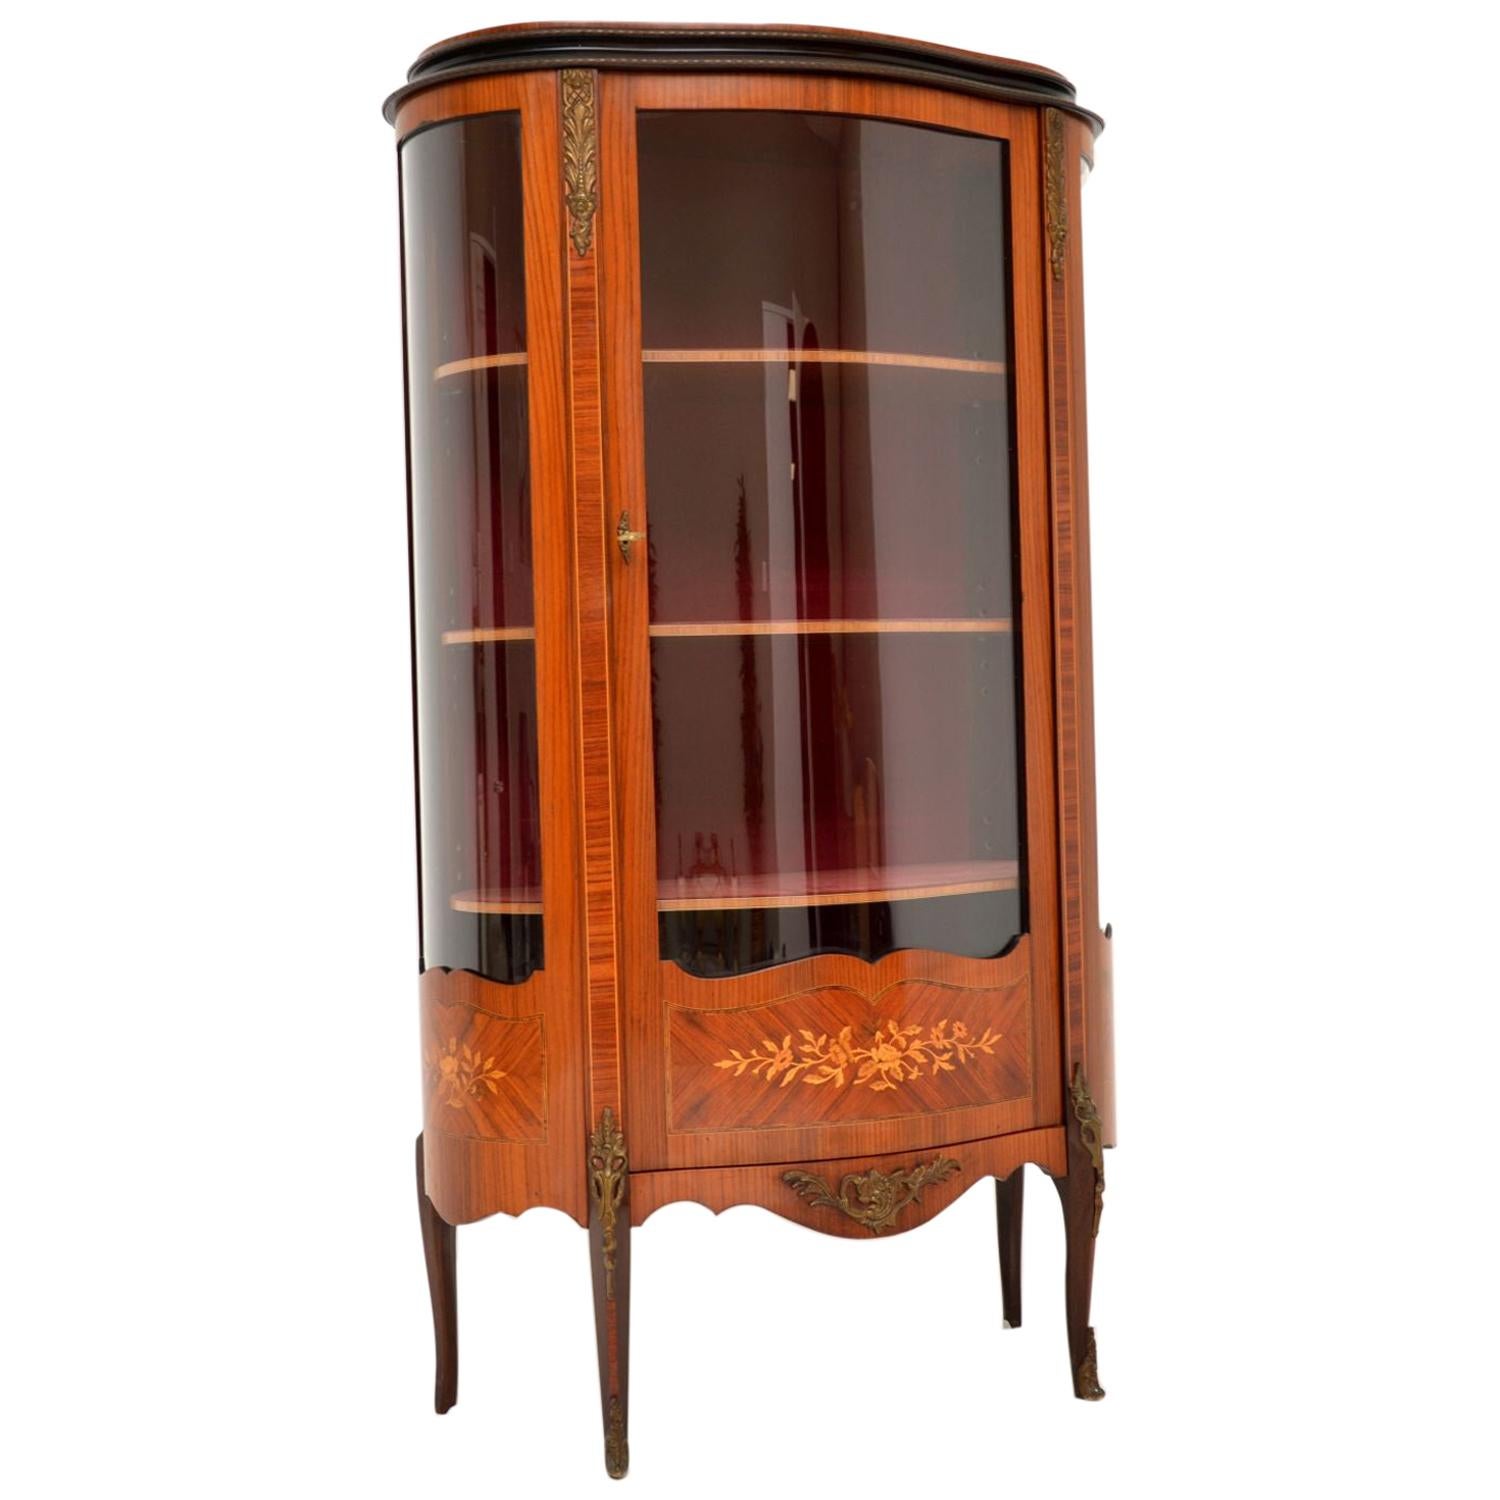 Antique French Kingwood display cabinet with three floral marquetry panels at the base and various other inlays.

It has a curved front and gilt bronze mounts. The inside lining is a kind of plush velvet, which is original to this item and is